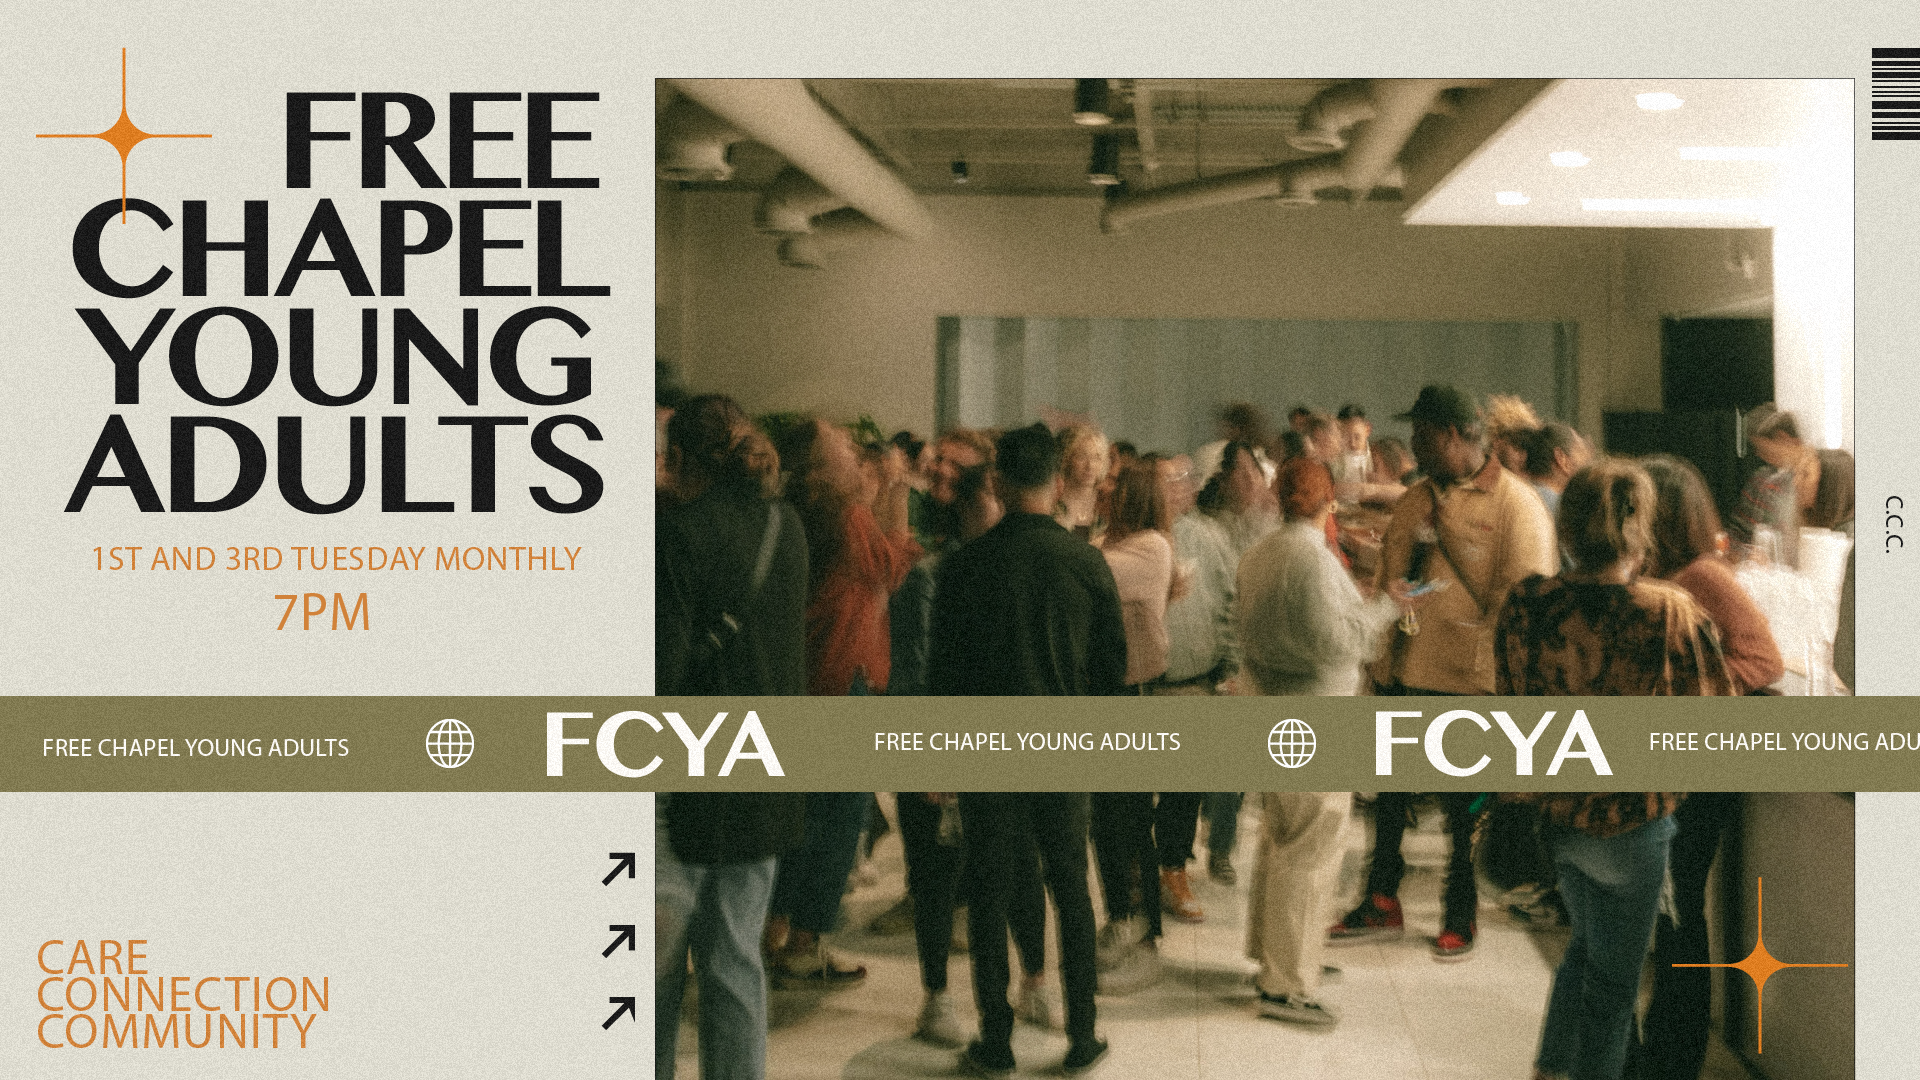 FCYA: First and Third Tuesday at the Braselton campus